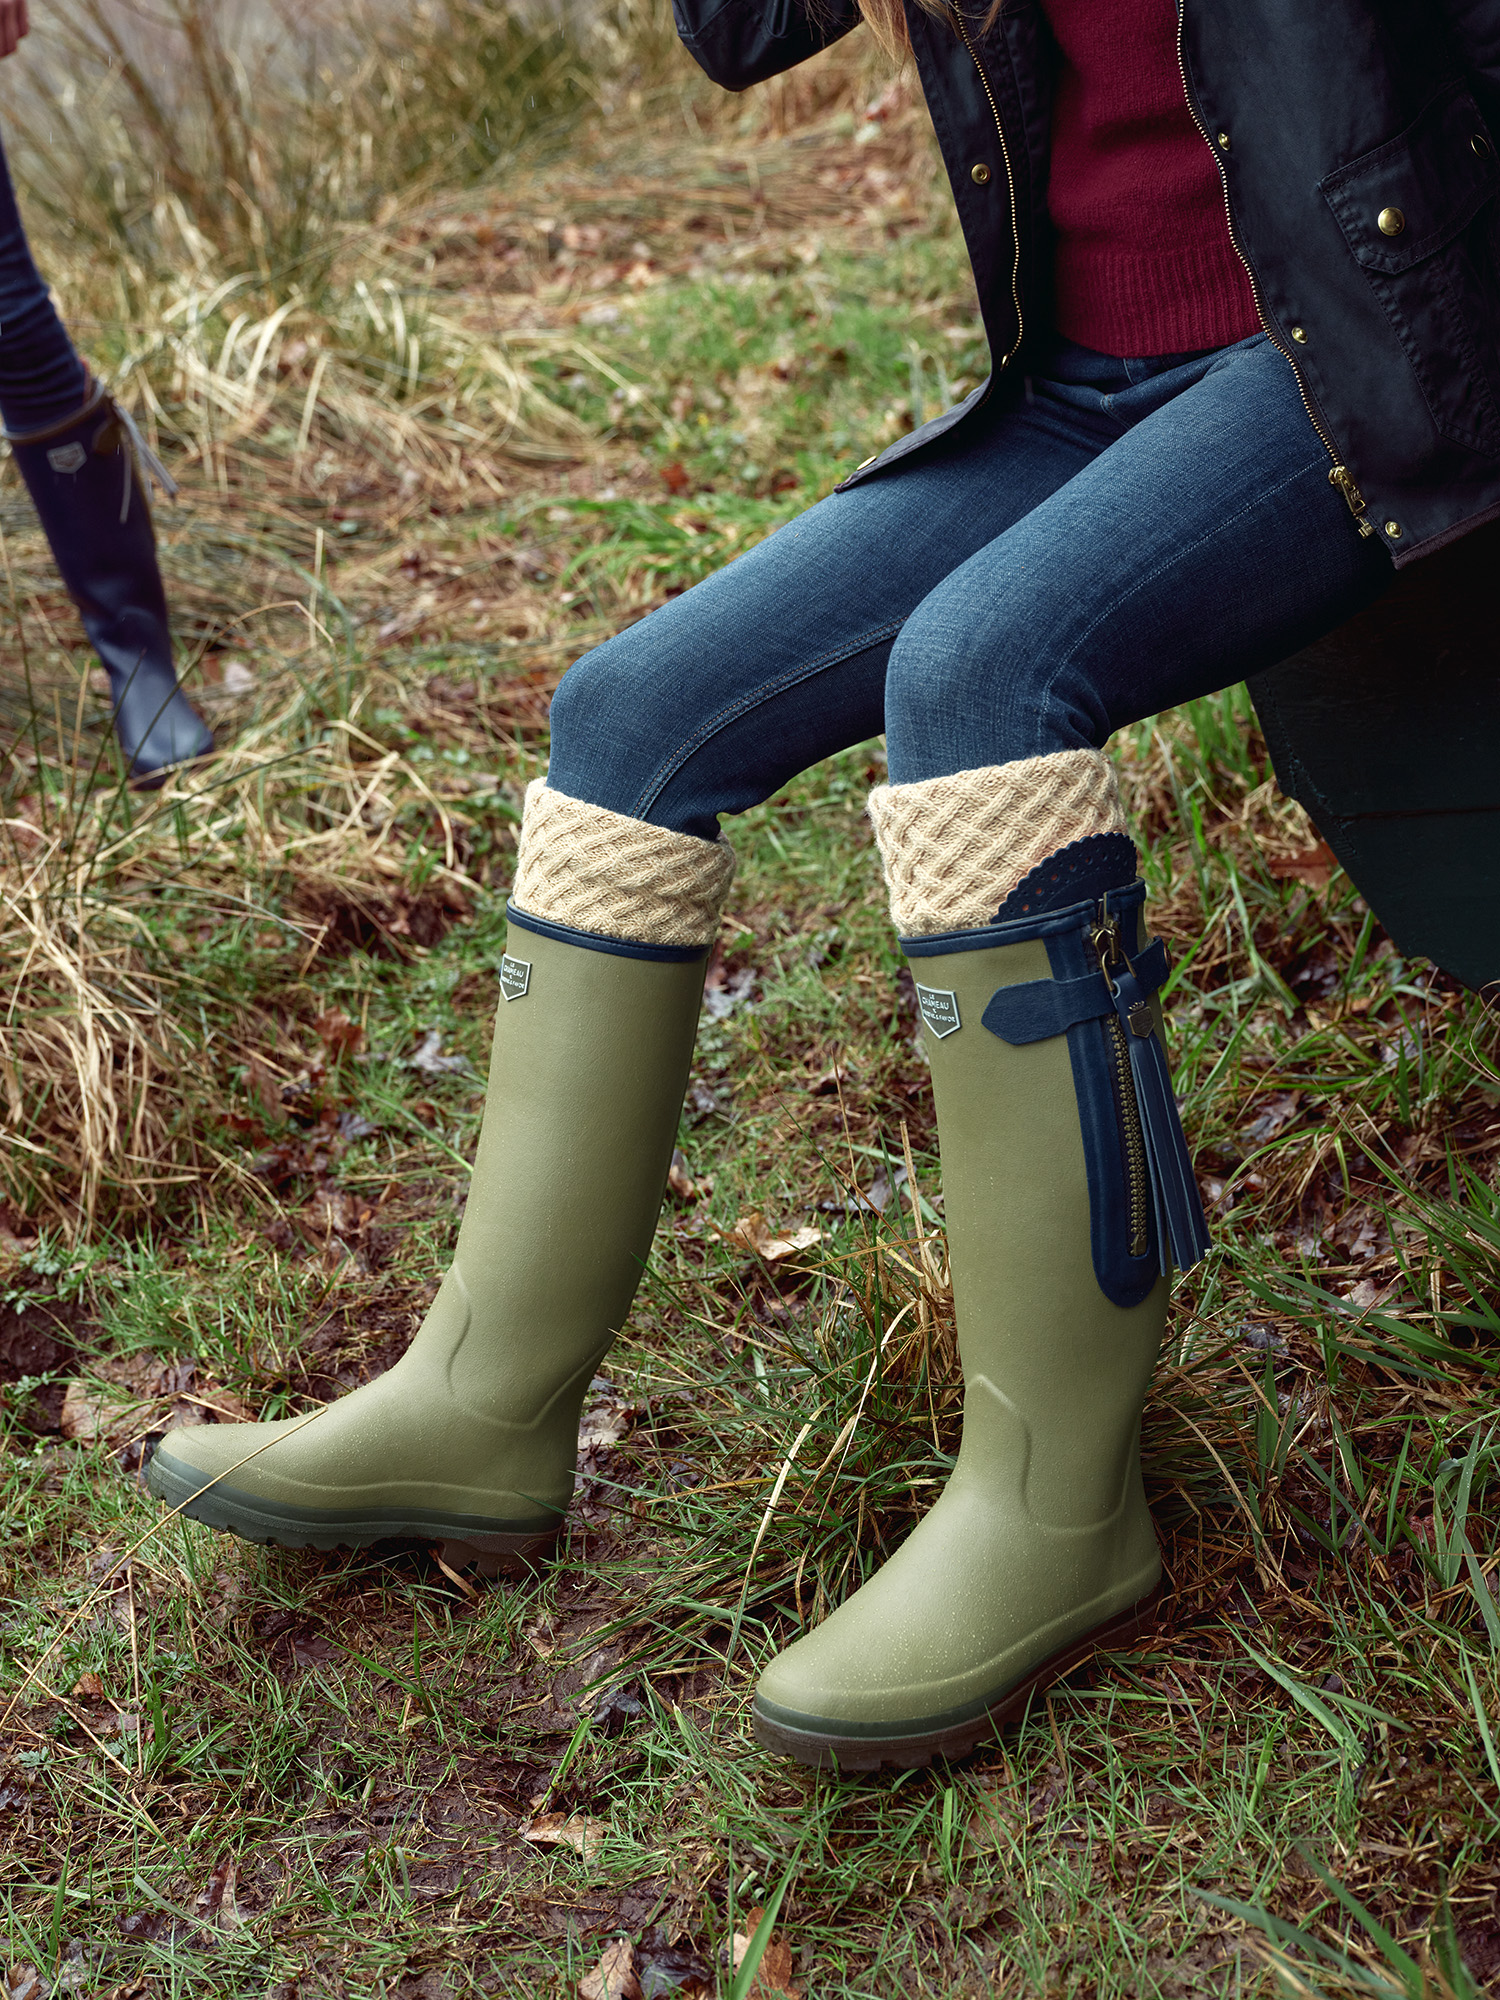 A Buyer's Guide to Premium Wellies - Philip Morris & Son